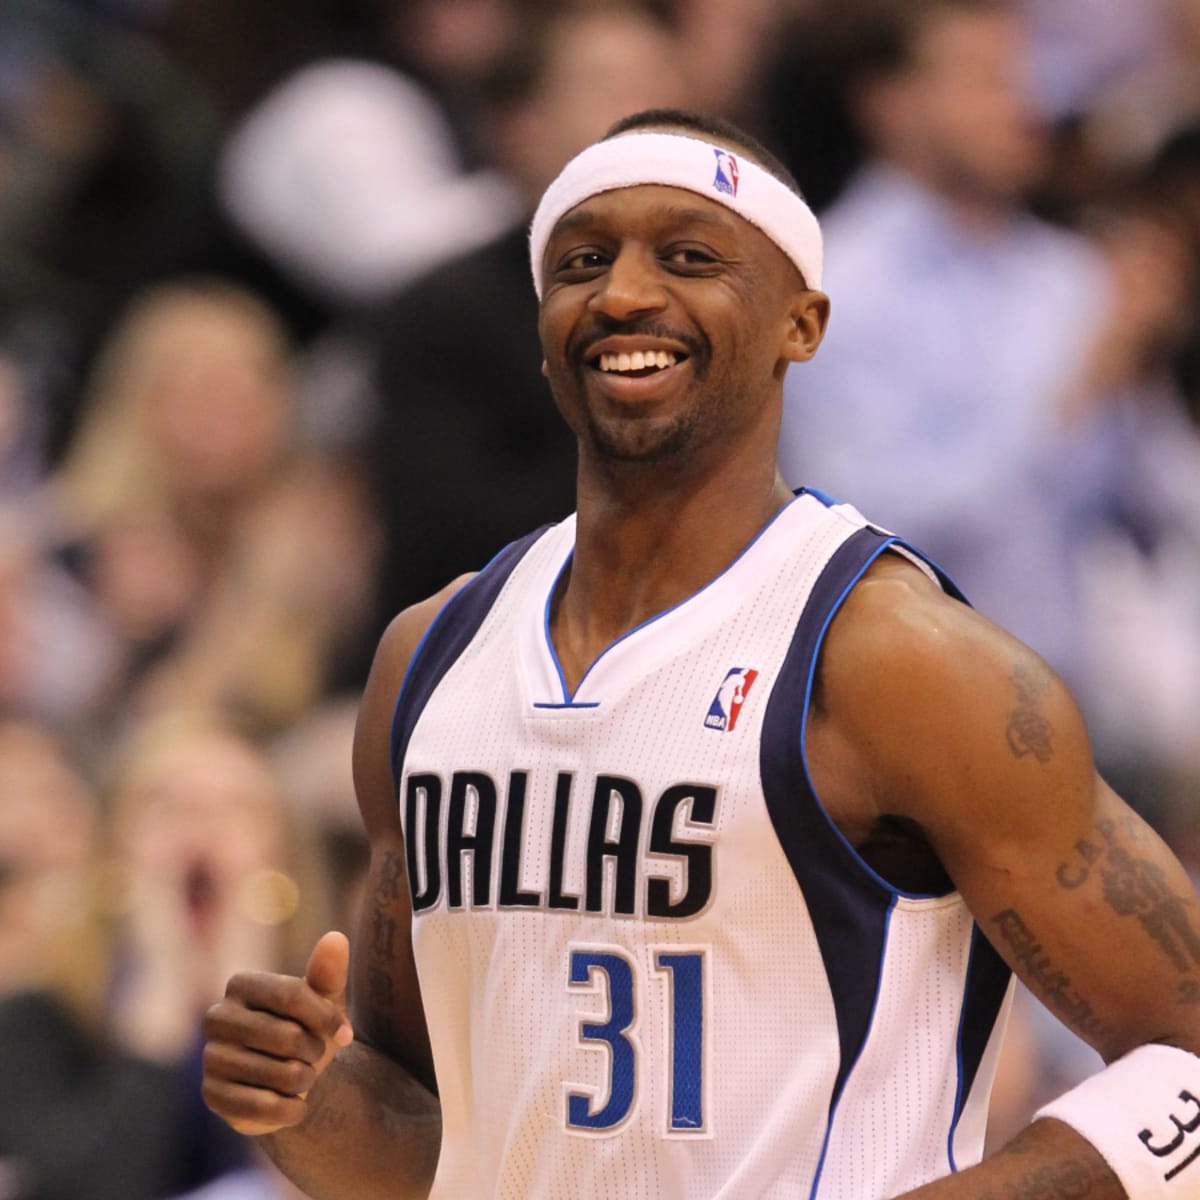 Once a Washington commit, Jason Terry explains why he flipped to